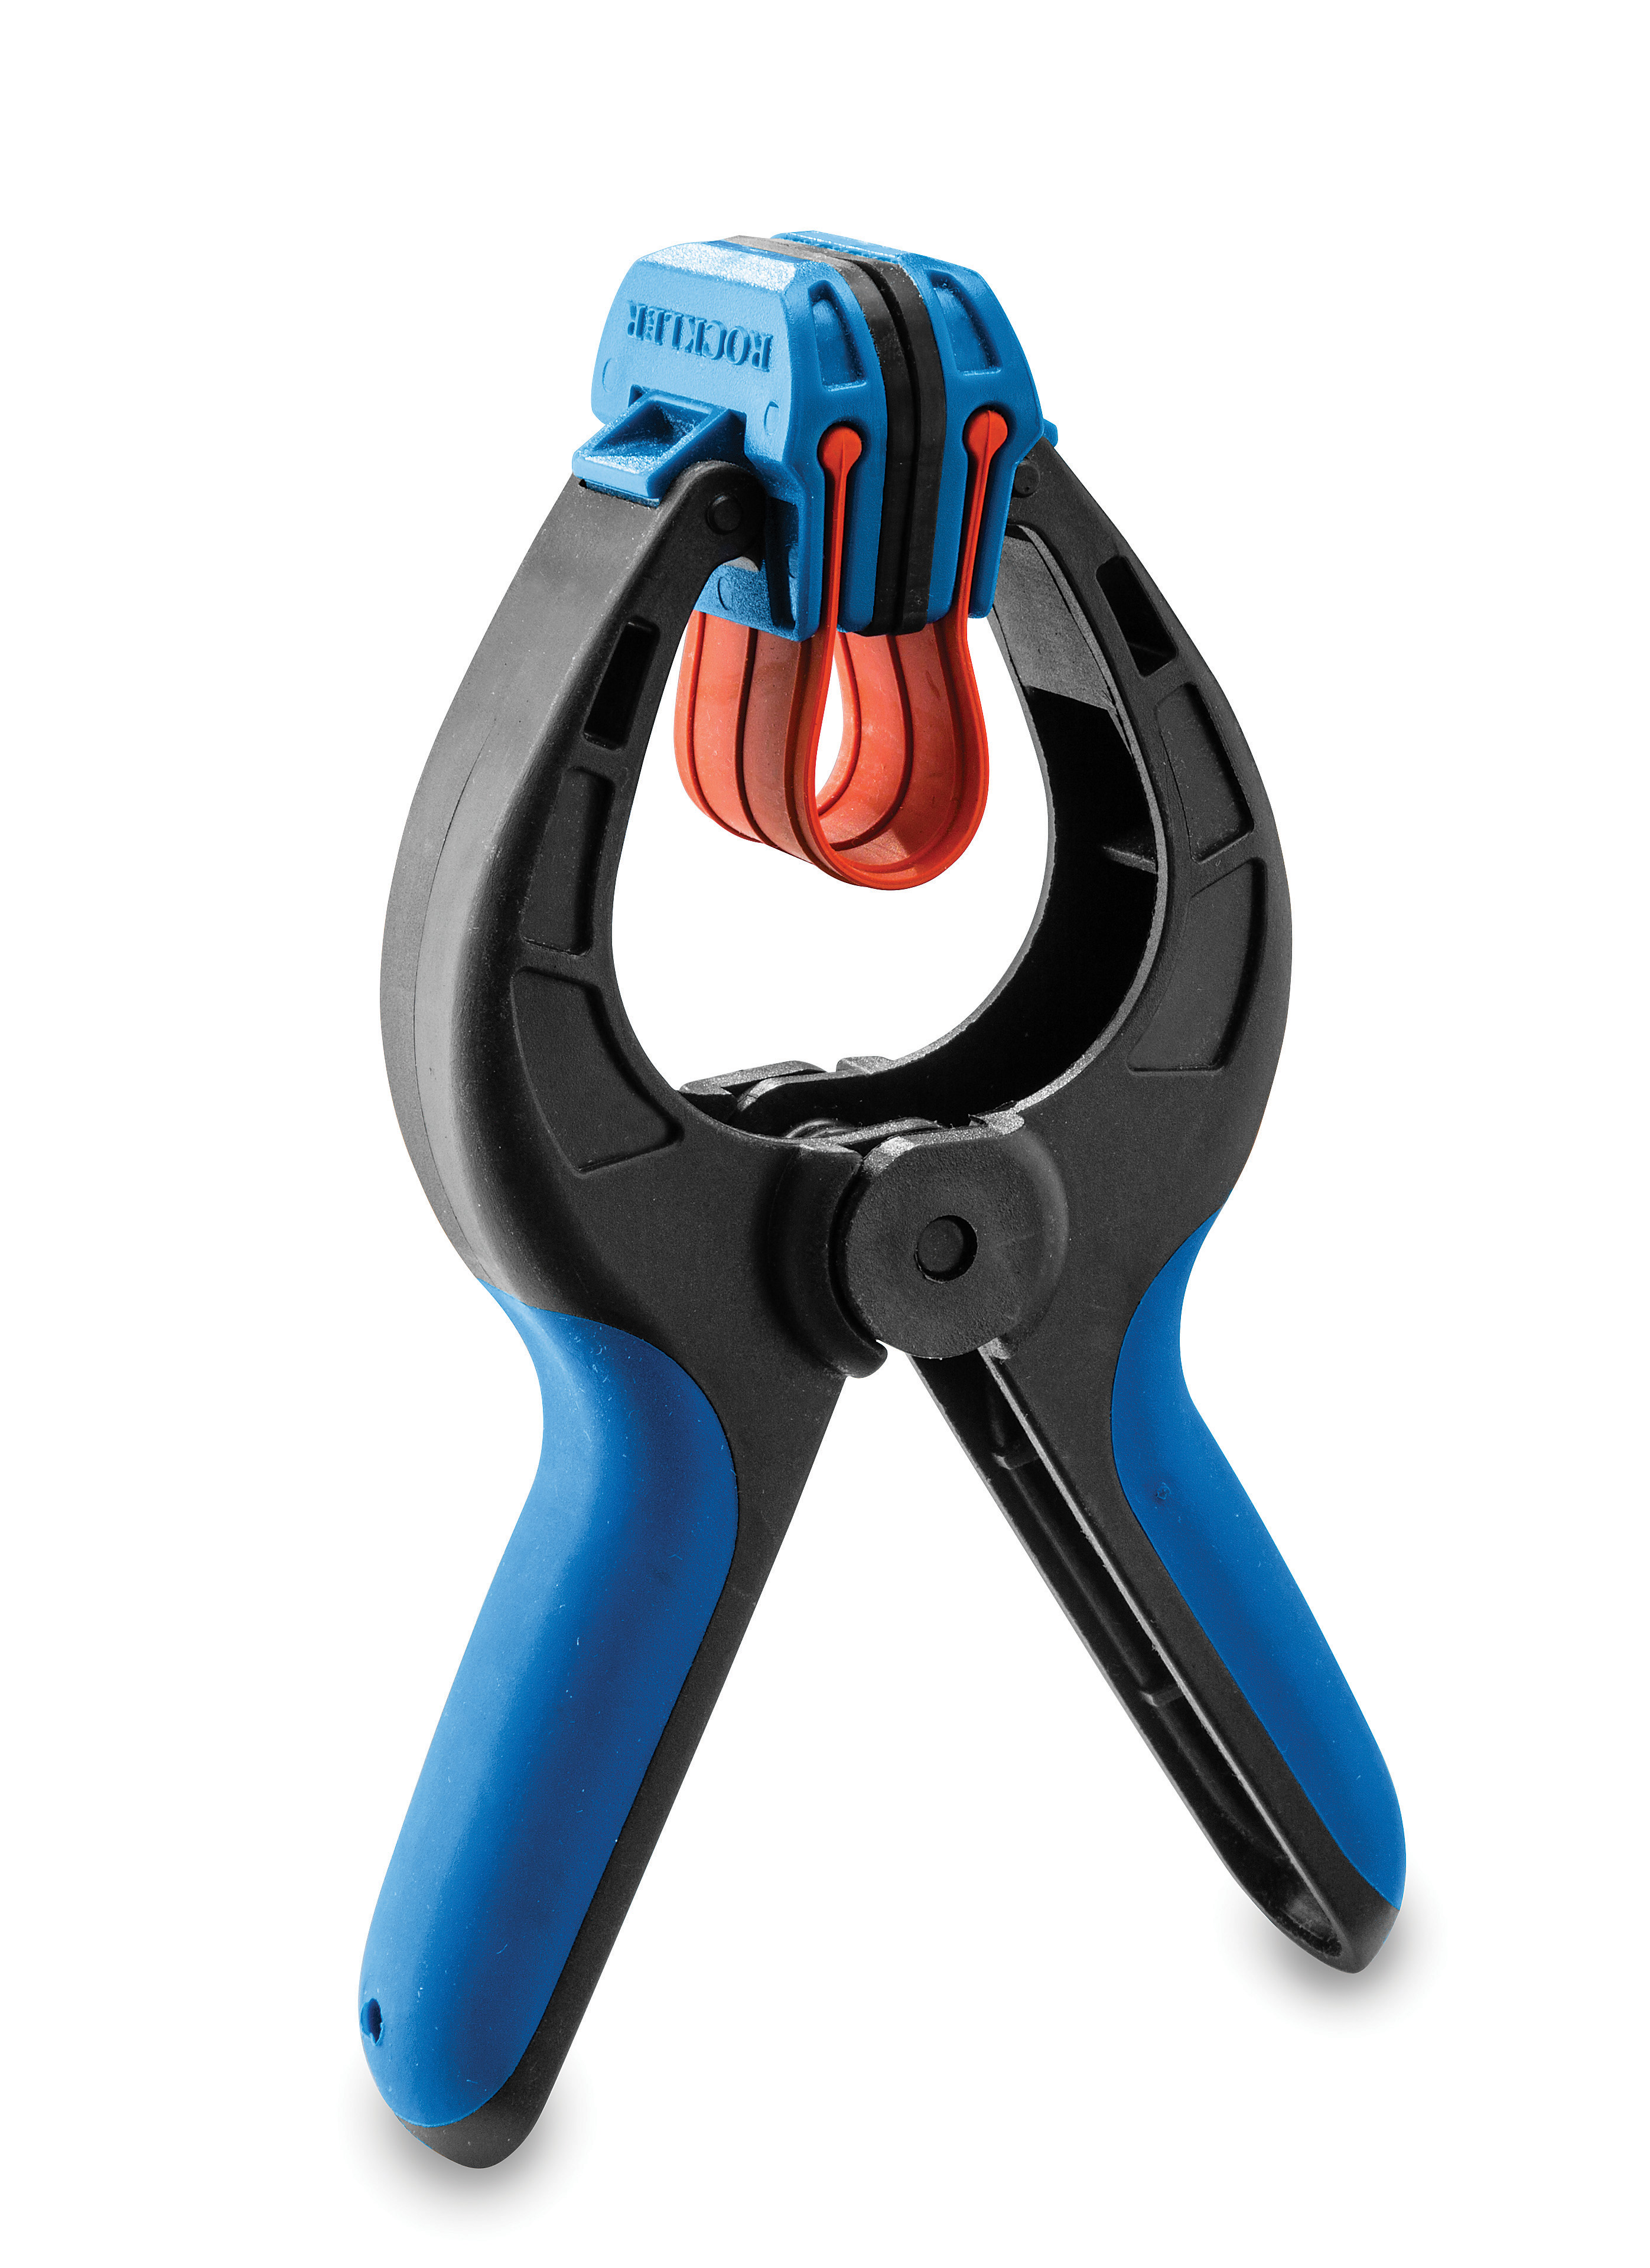 Rockler's Bandy Clamps won the spring clamp category in the hand tools division.